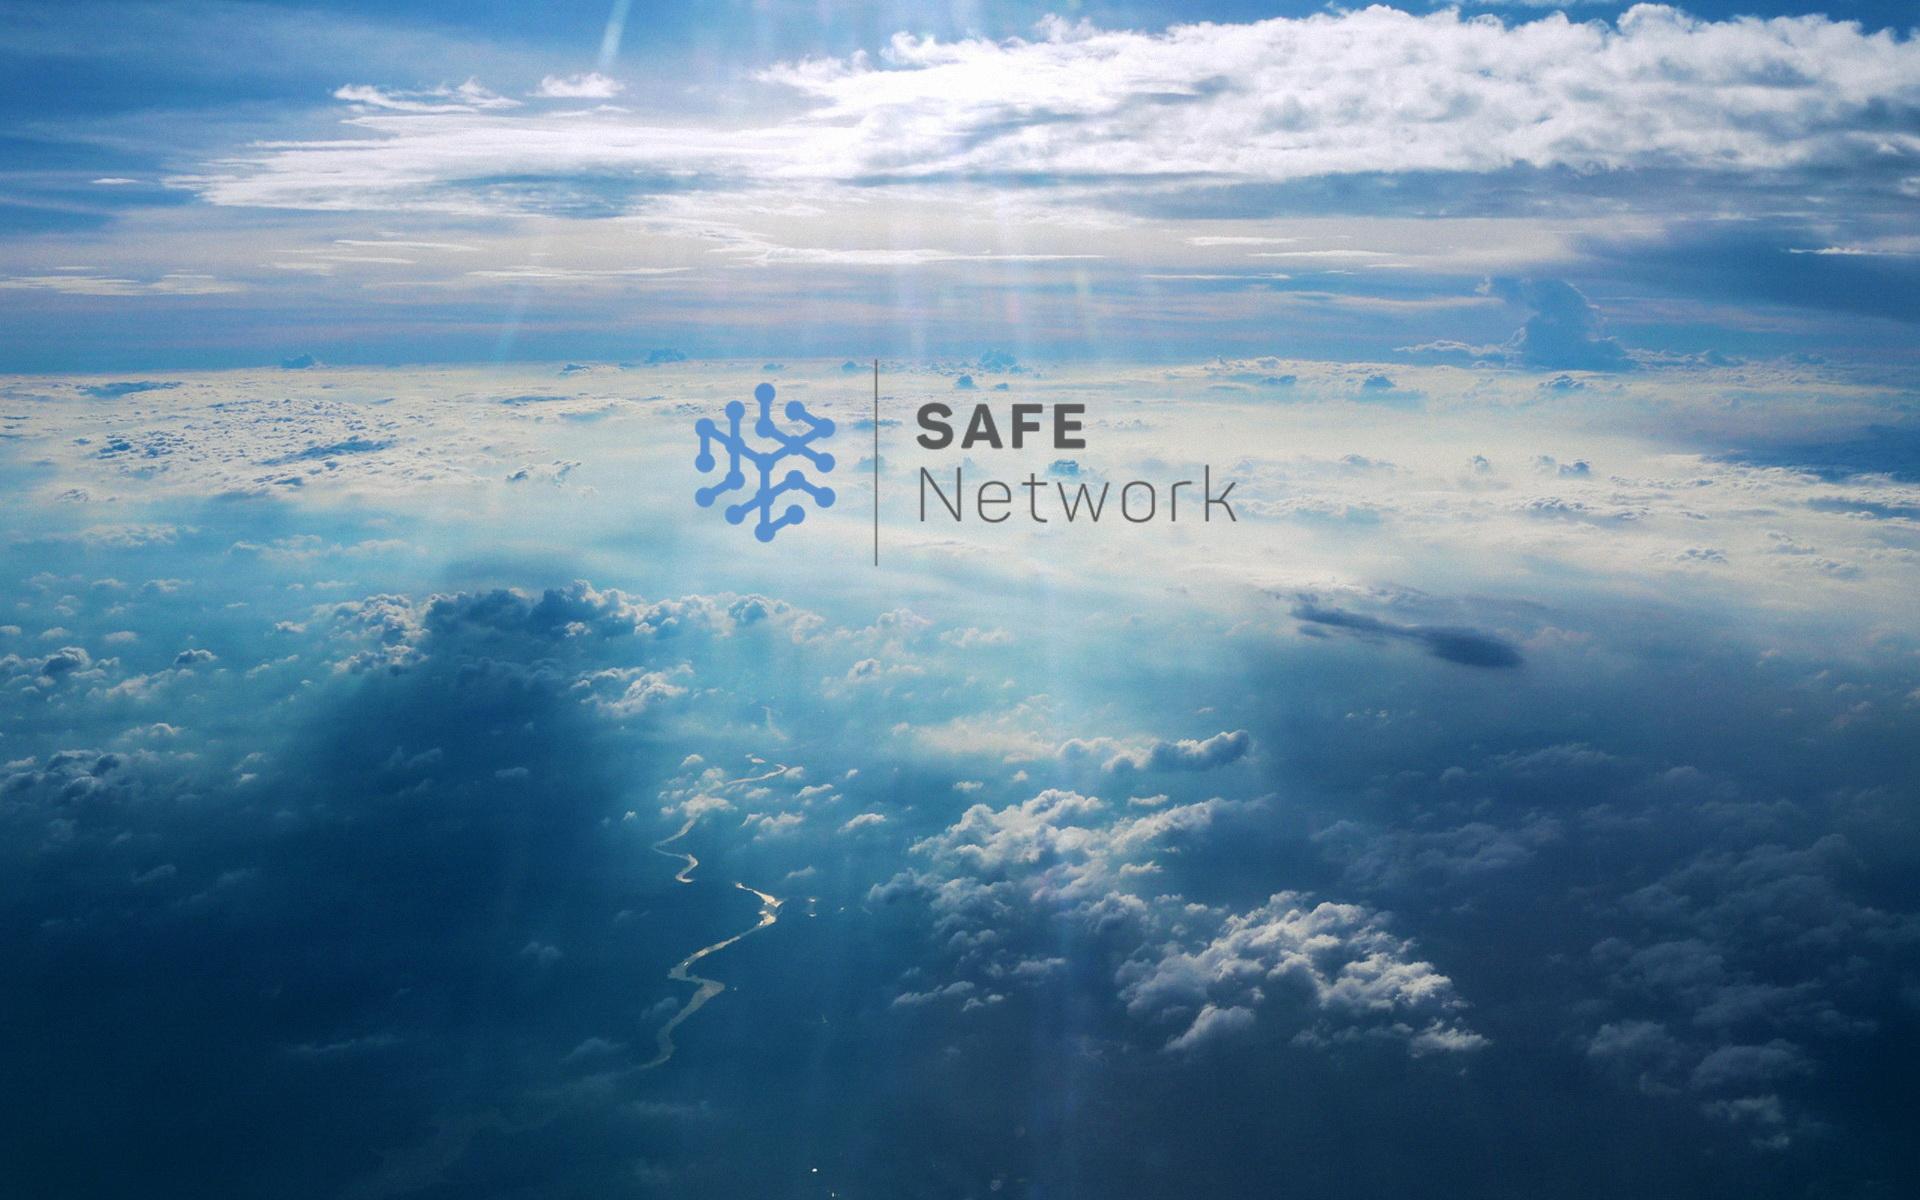 Want some nice SAFE Network wallpaper?